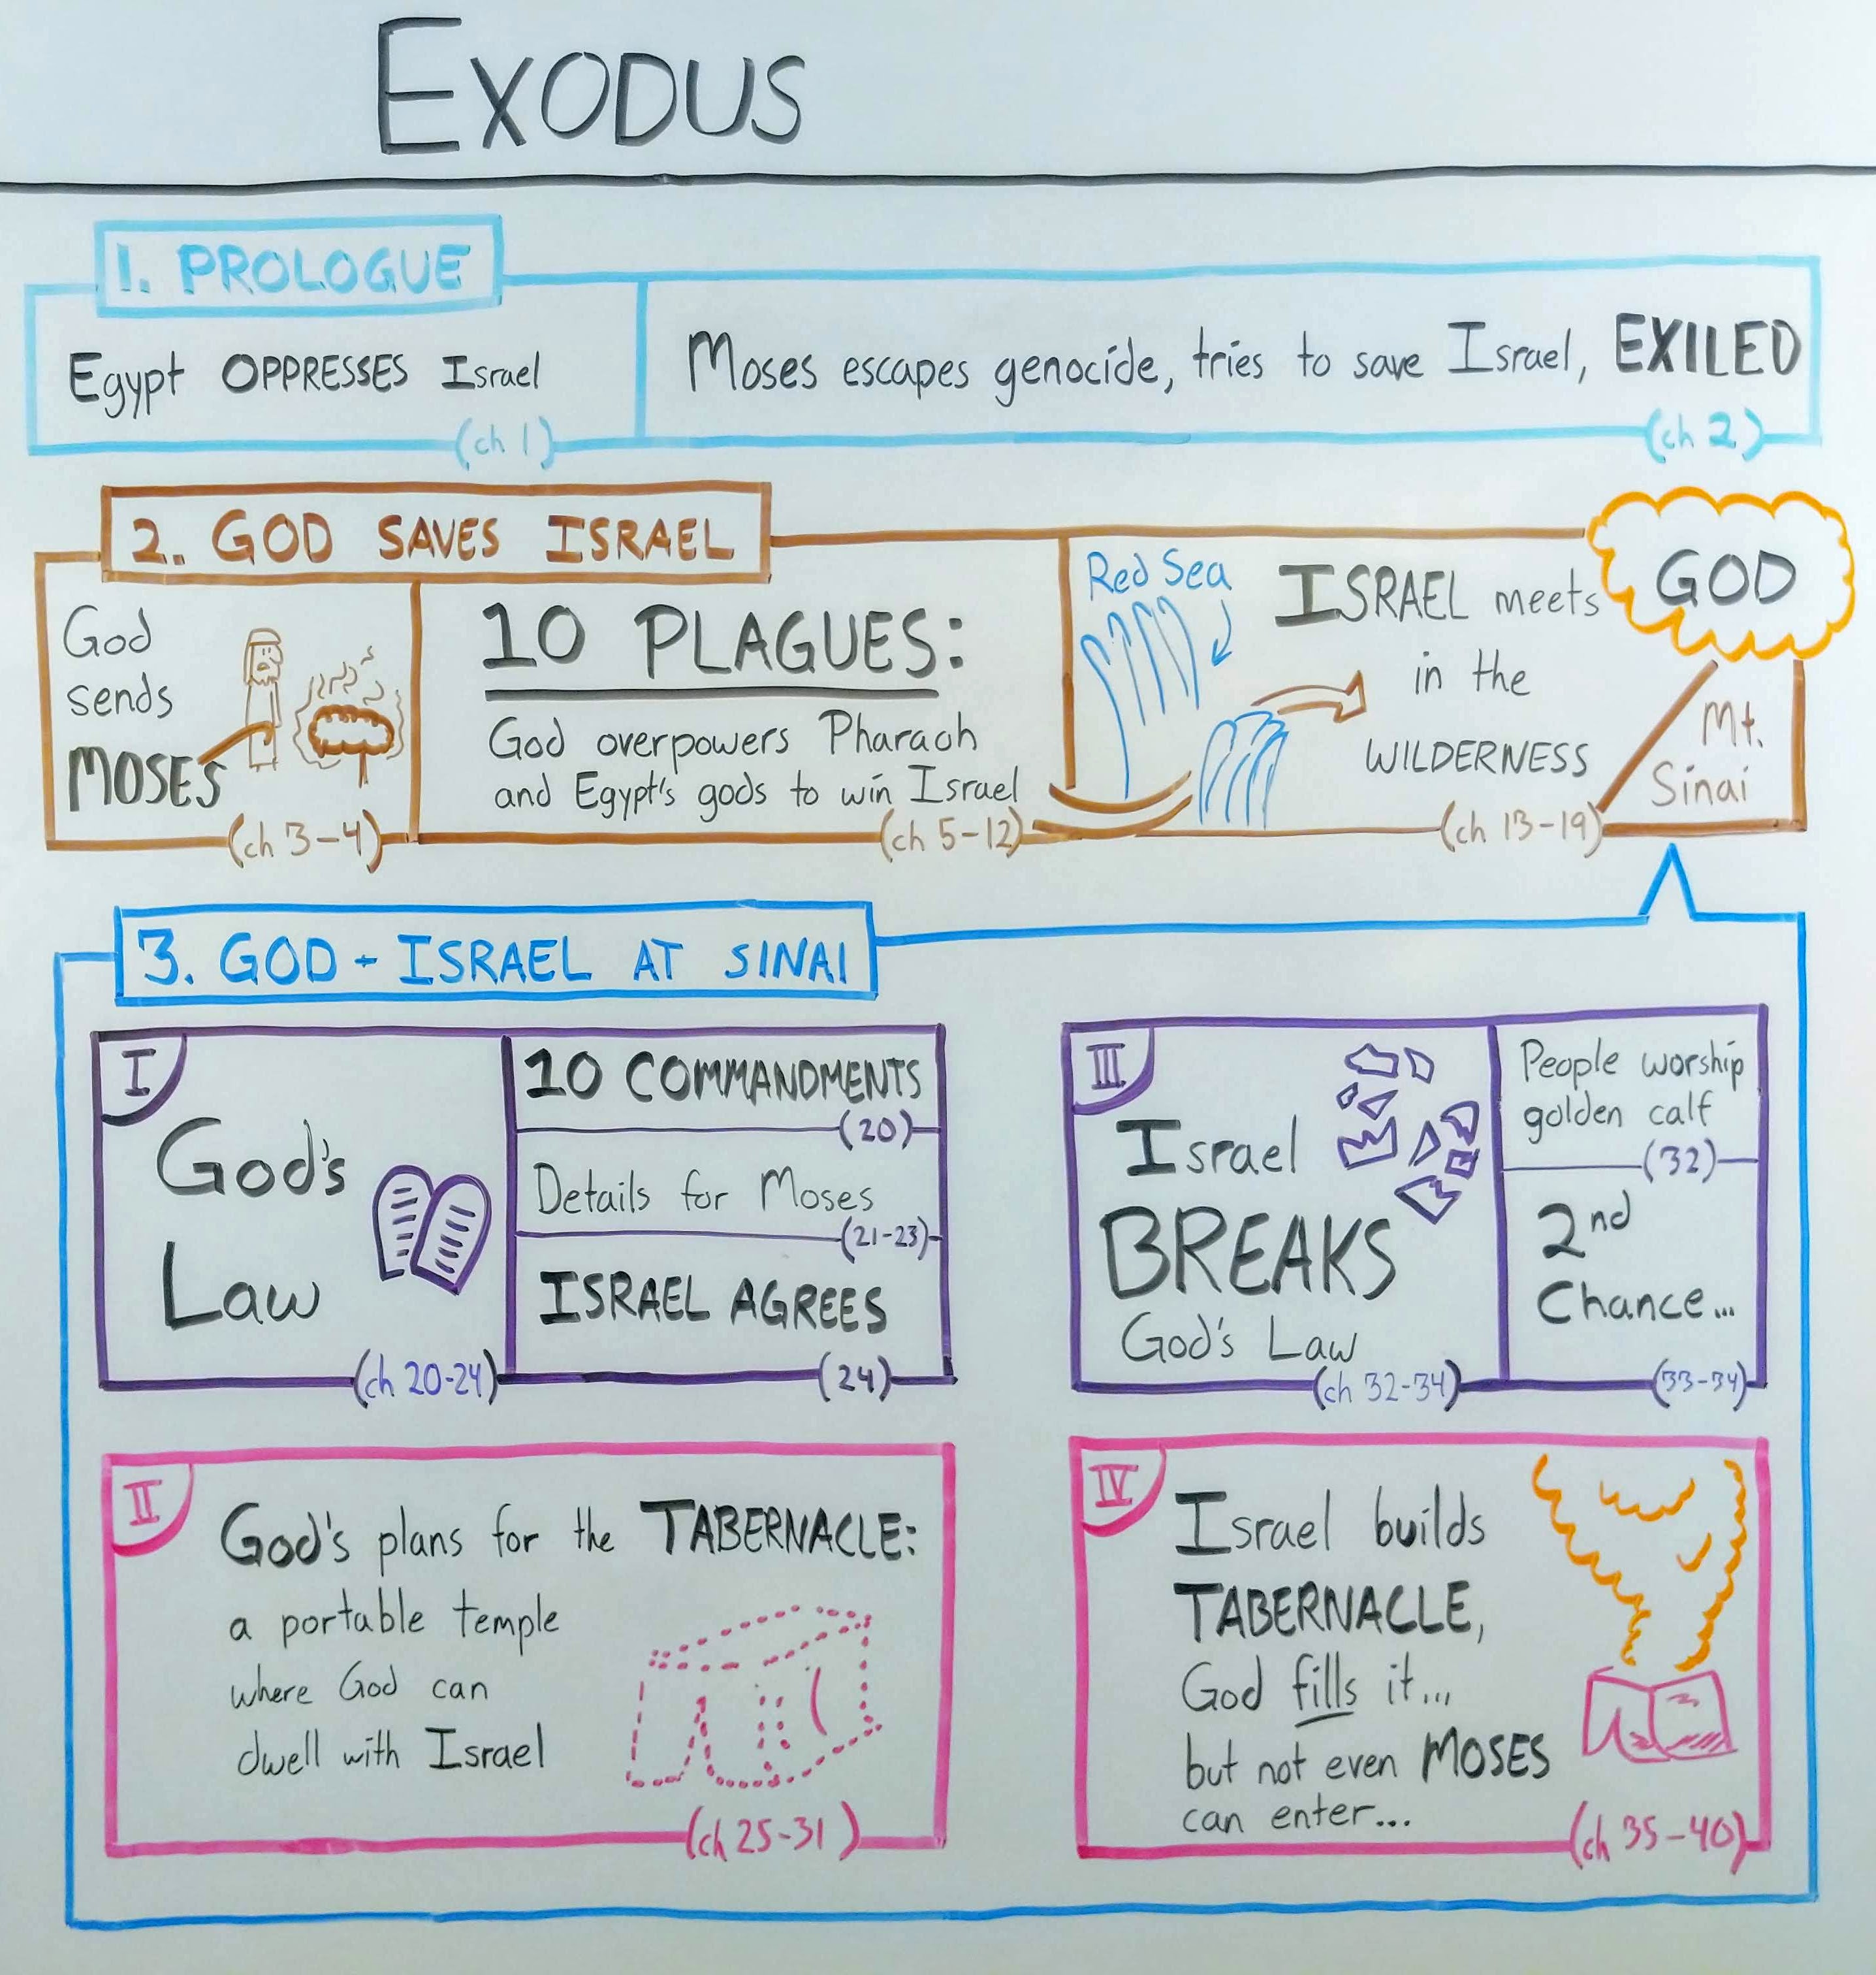 Book of Exodus Overview - Insight for Living Ministries